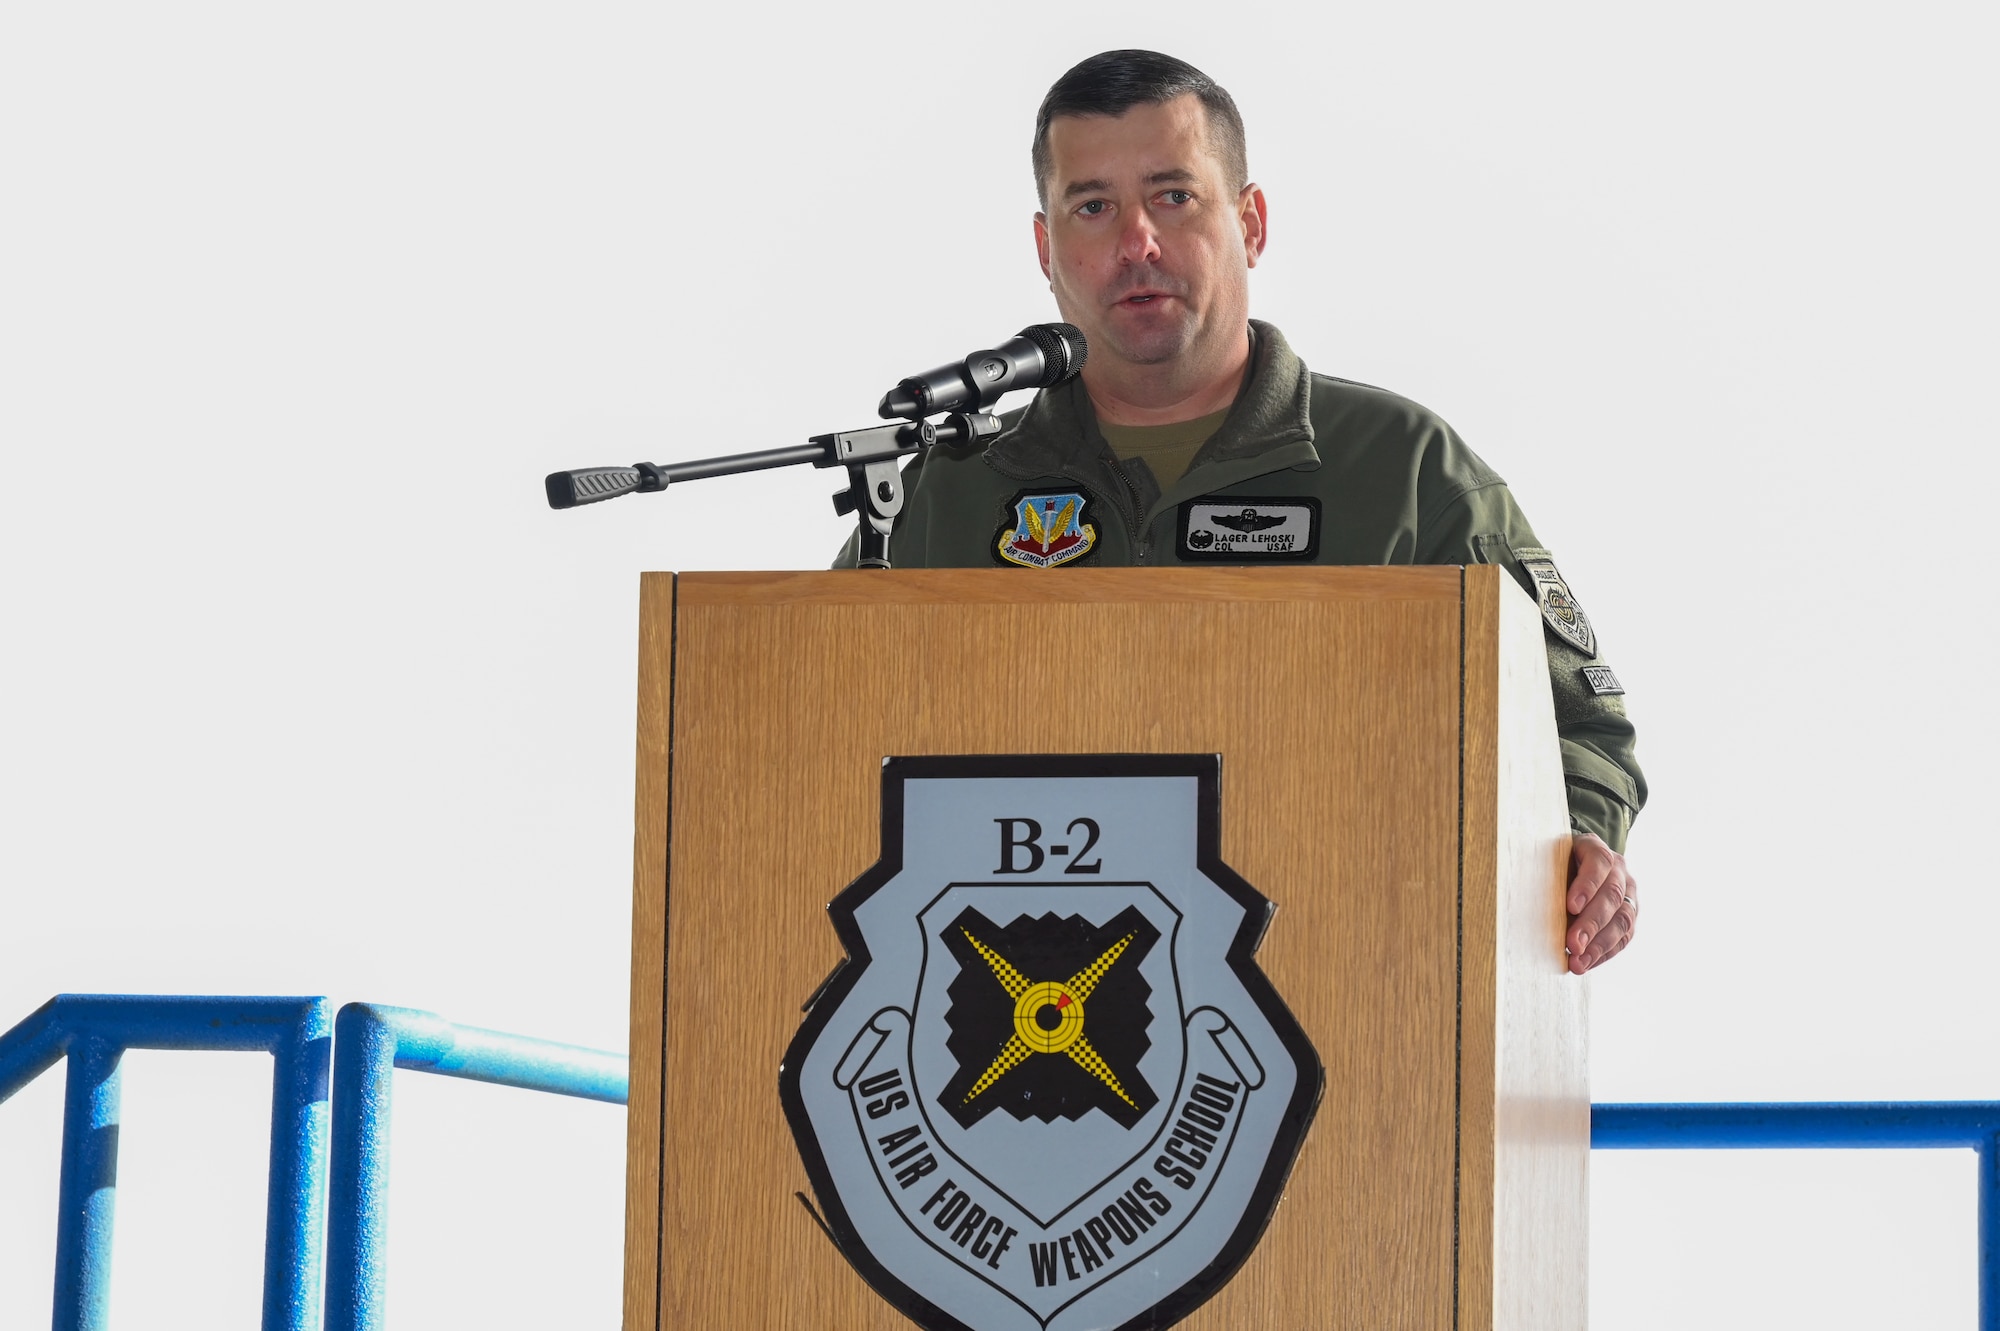 Col. Daniel Lehoski, United States Air Force Weapons School Commandant, speaks during a change of command at Whiteman Air Force Base, Missouri, December 14, 2022. Change of commands are a tradition dating back hundreds of years, with the U.S. Air Force adopting it from the U.S. Army. (U.S. Air Force photo by Airman 1st Class Joseph Garcia)